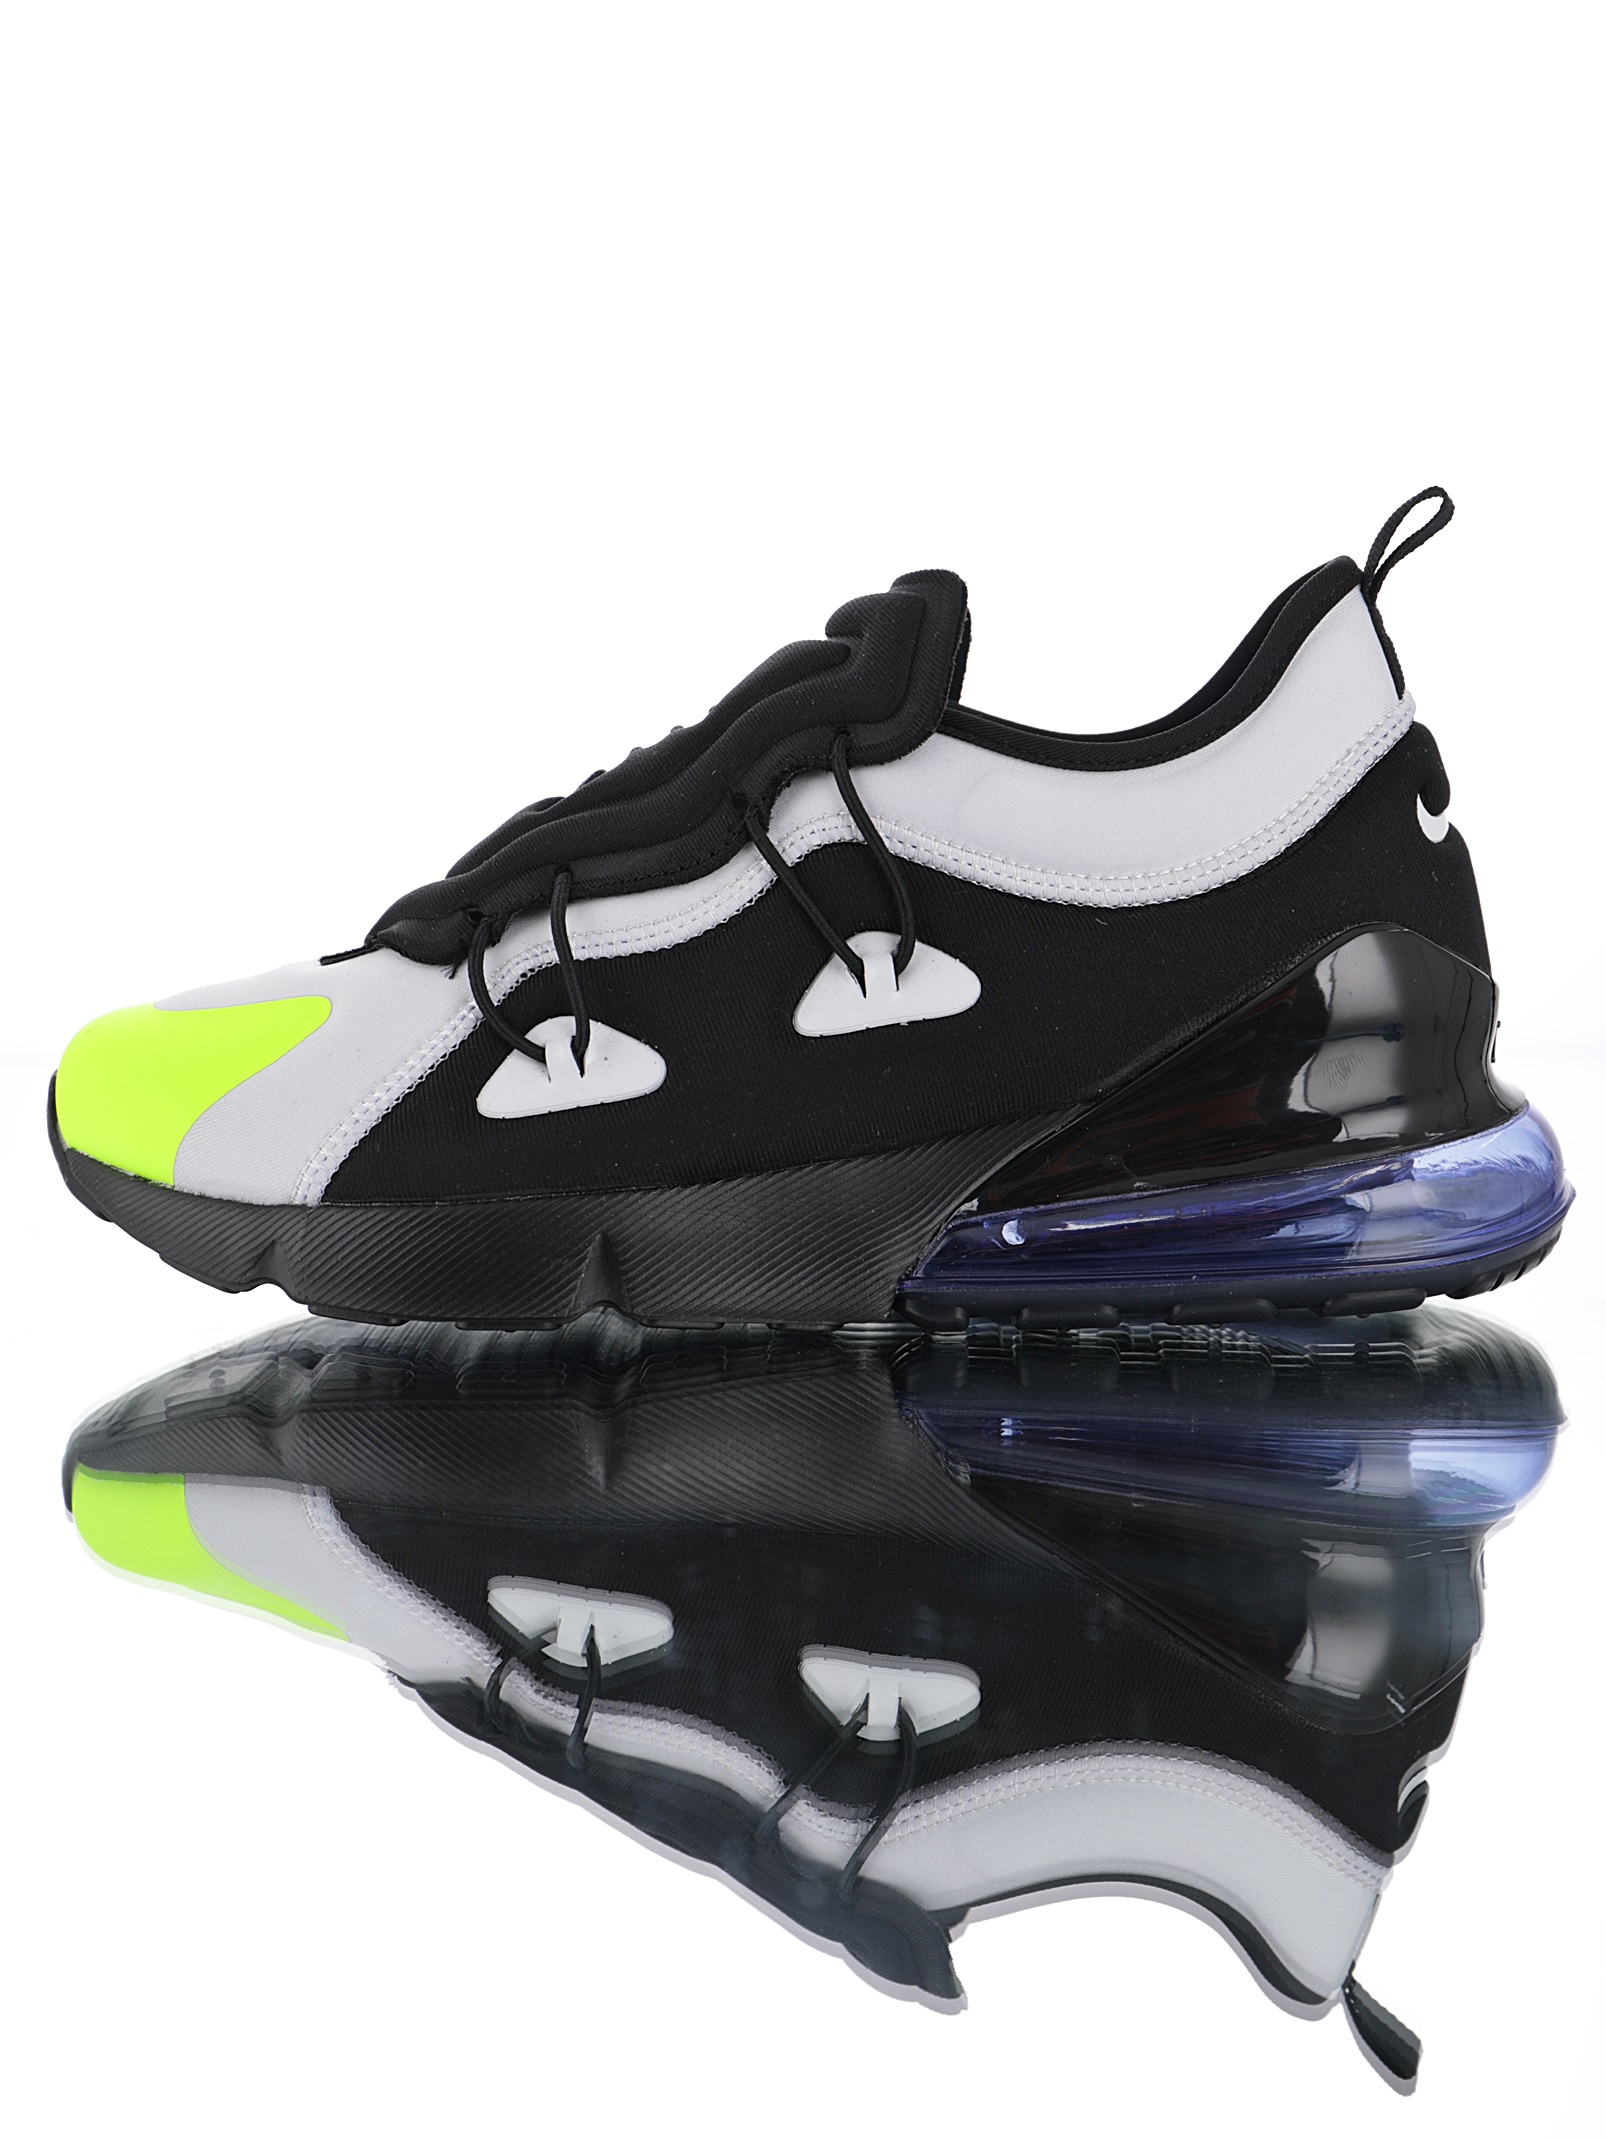 NIKE AIR MAX 270 socks black and white yellow Cost-effective